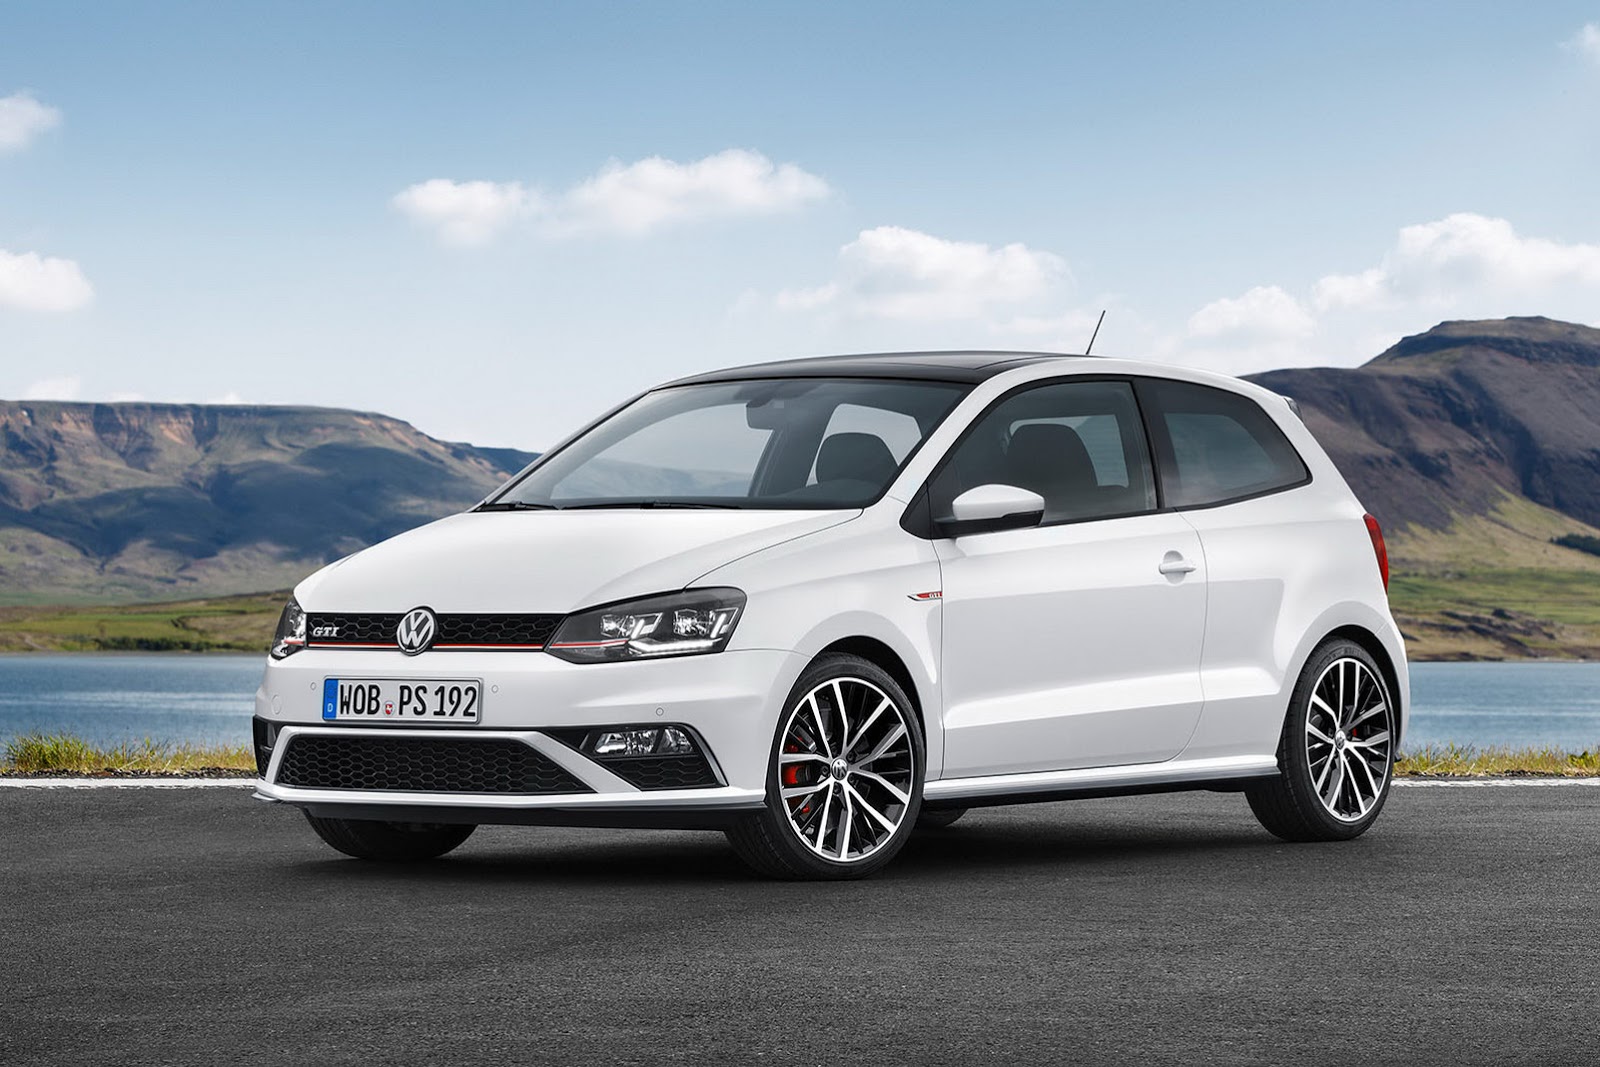 Victor enthusiasm Normalization 2015 Volkswagen Polo GTI Revealed with 1.8 TSI Engine